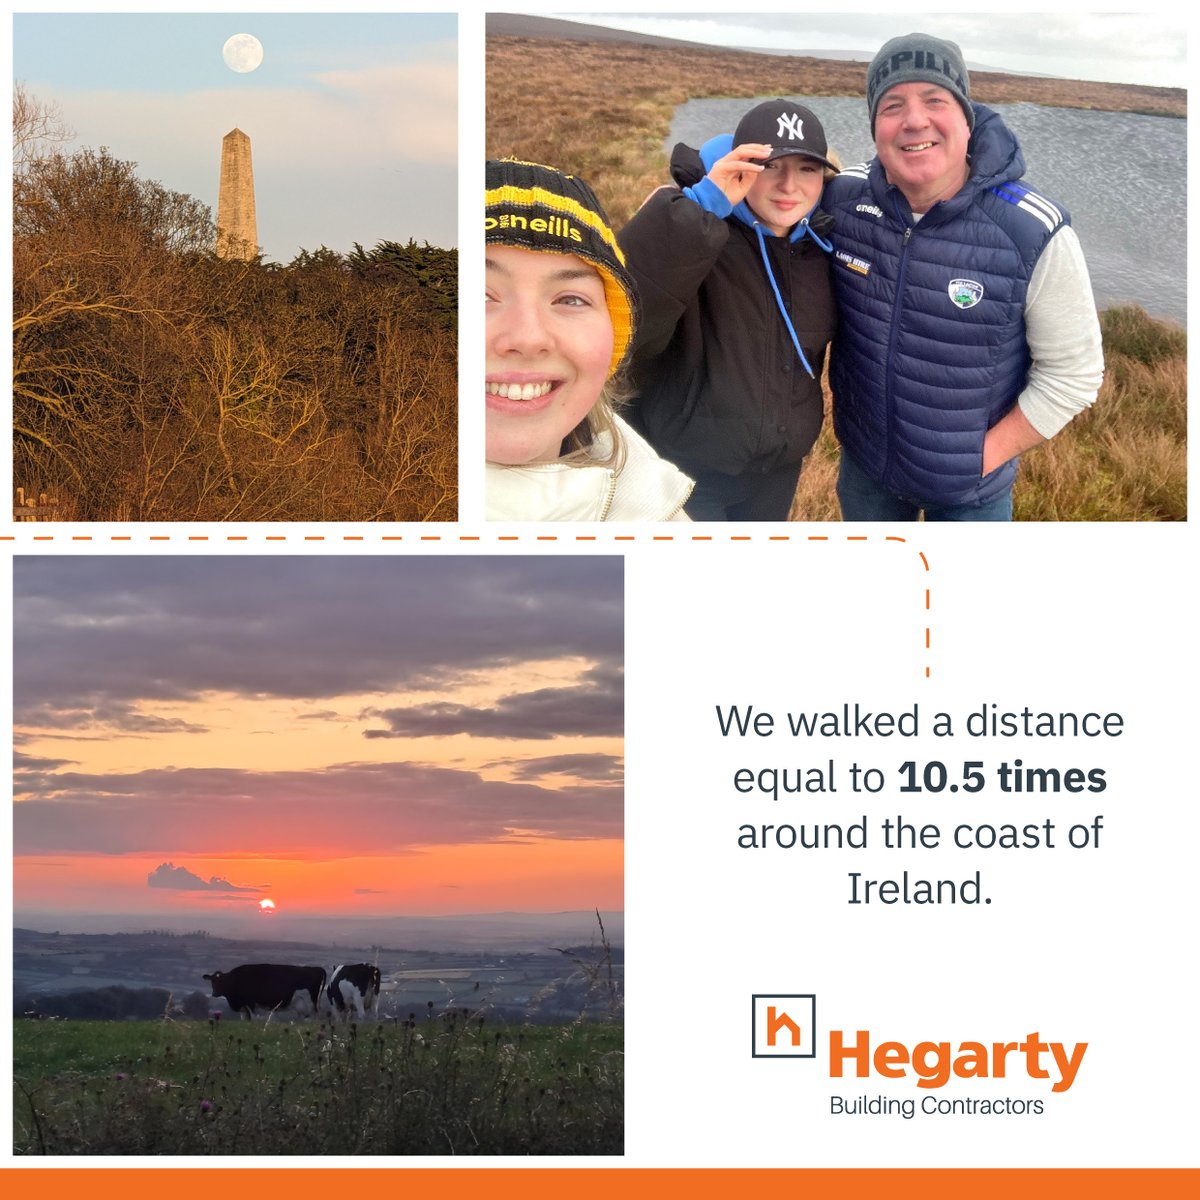 Our teams in Ireland & the UK embarked on our annual #StepsChallenge. Together, we amassed over 46 million steps, with our top stepper nearly reaching an impressive one million steps! 
#PJHegarty #BuildingPartnership